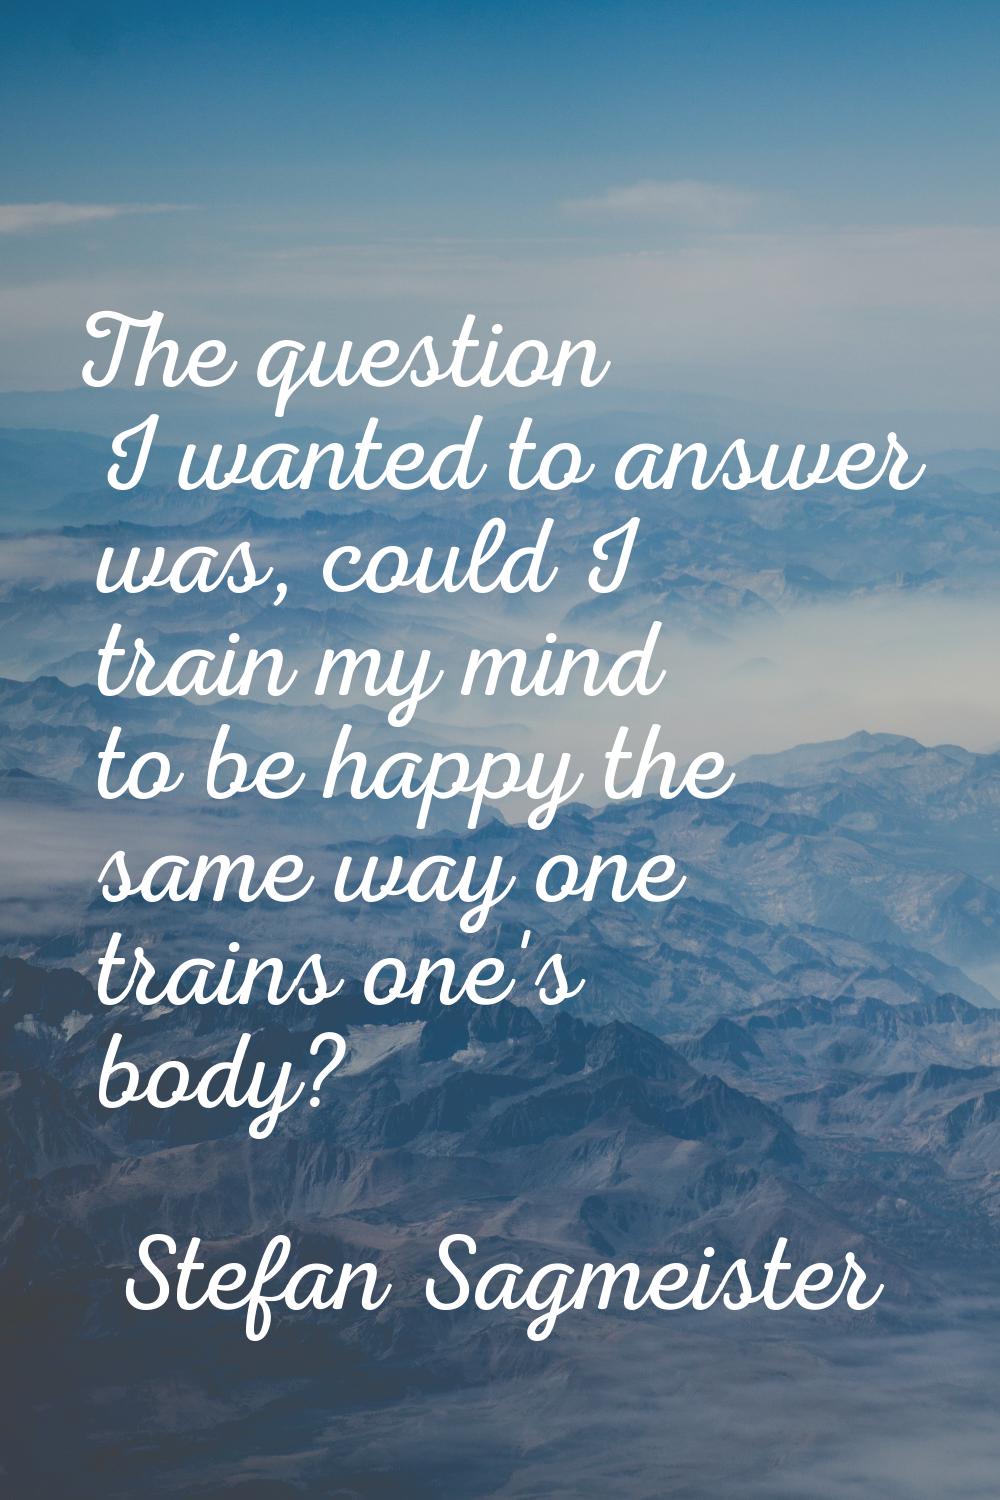 The question I wanted to answer was, could I train my mind to be happy the same way one trains one'